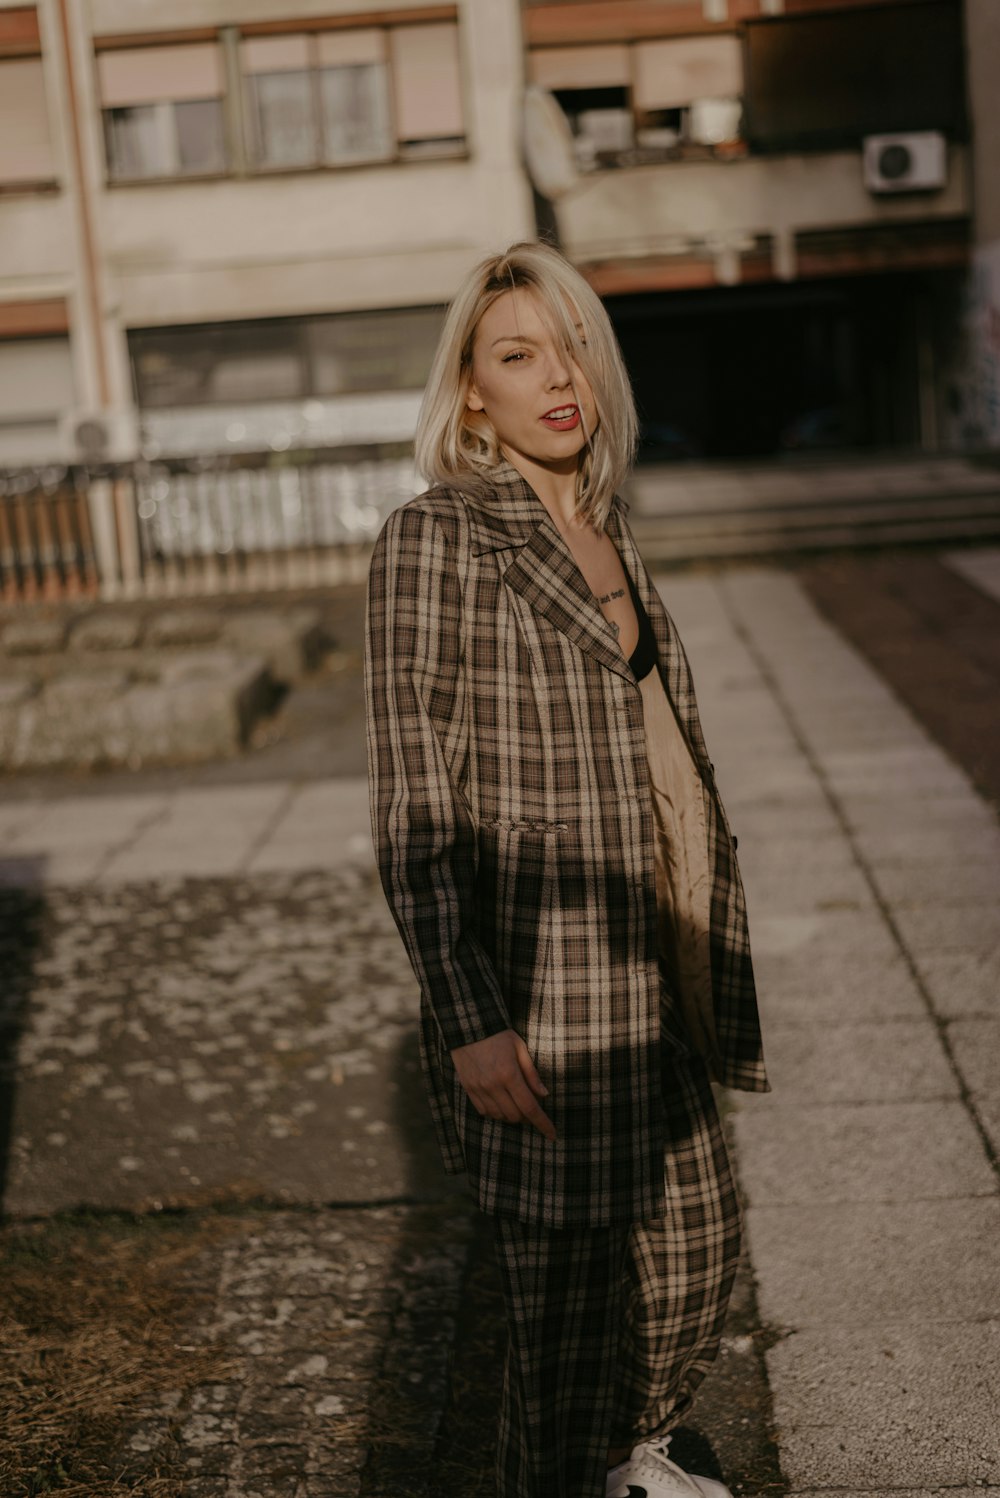 woman wearing brown and white plaid coat during daytime